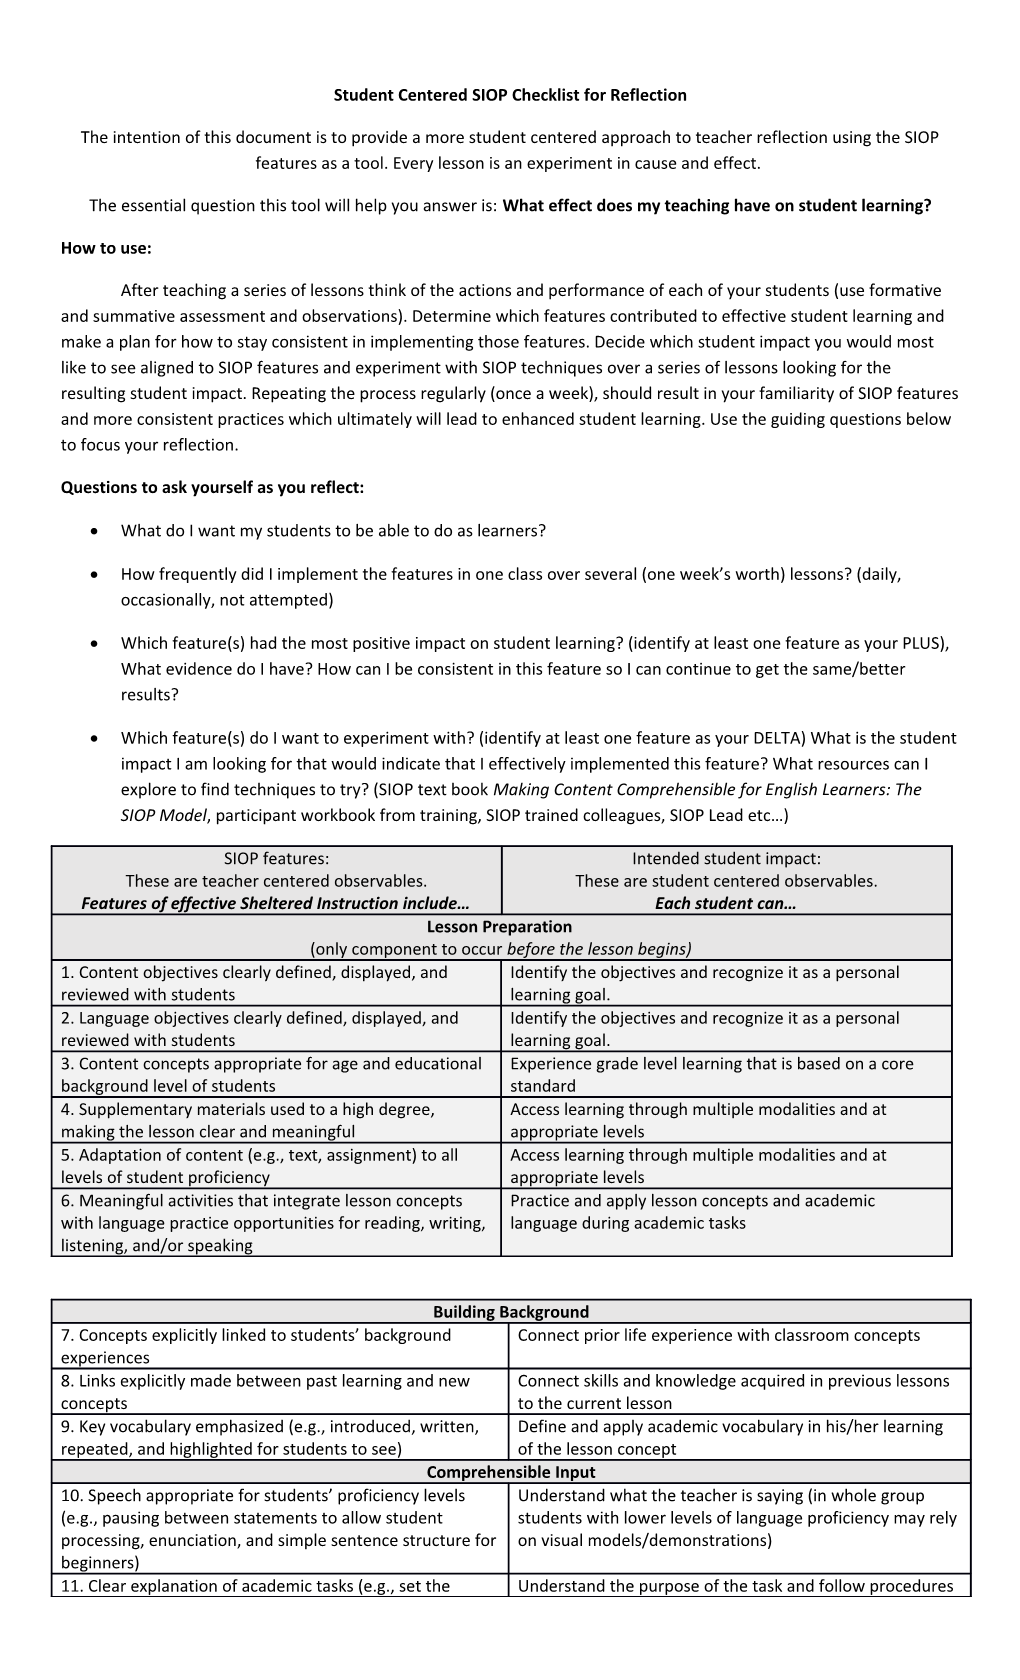 Student Centered SIOP Checklist for Reflection